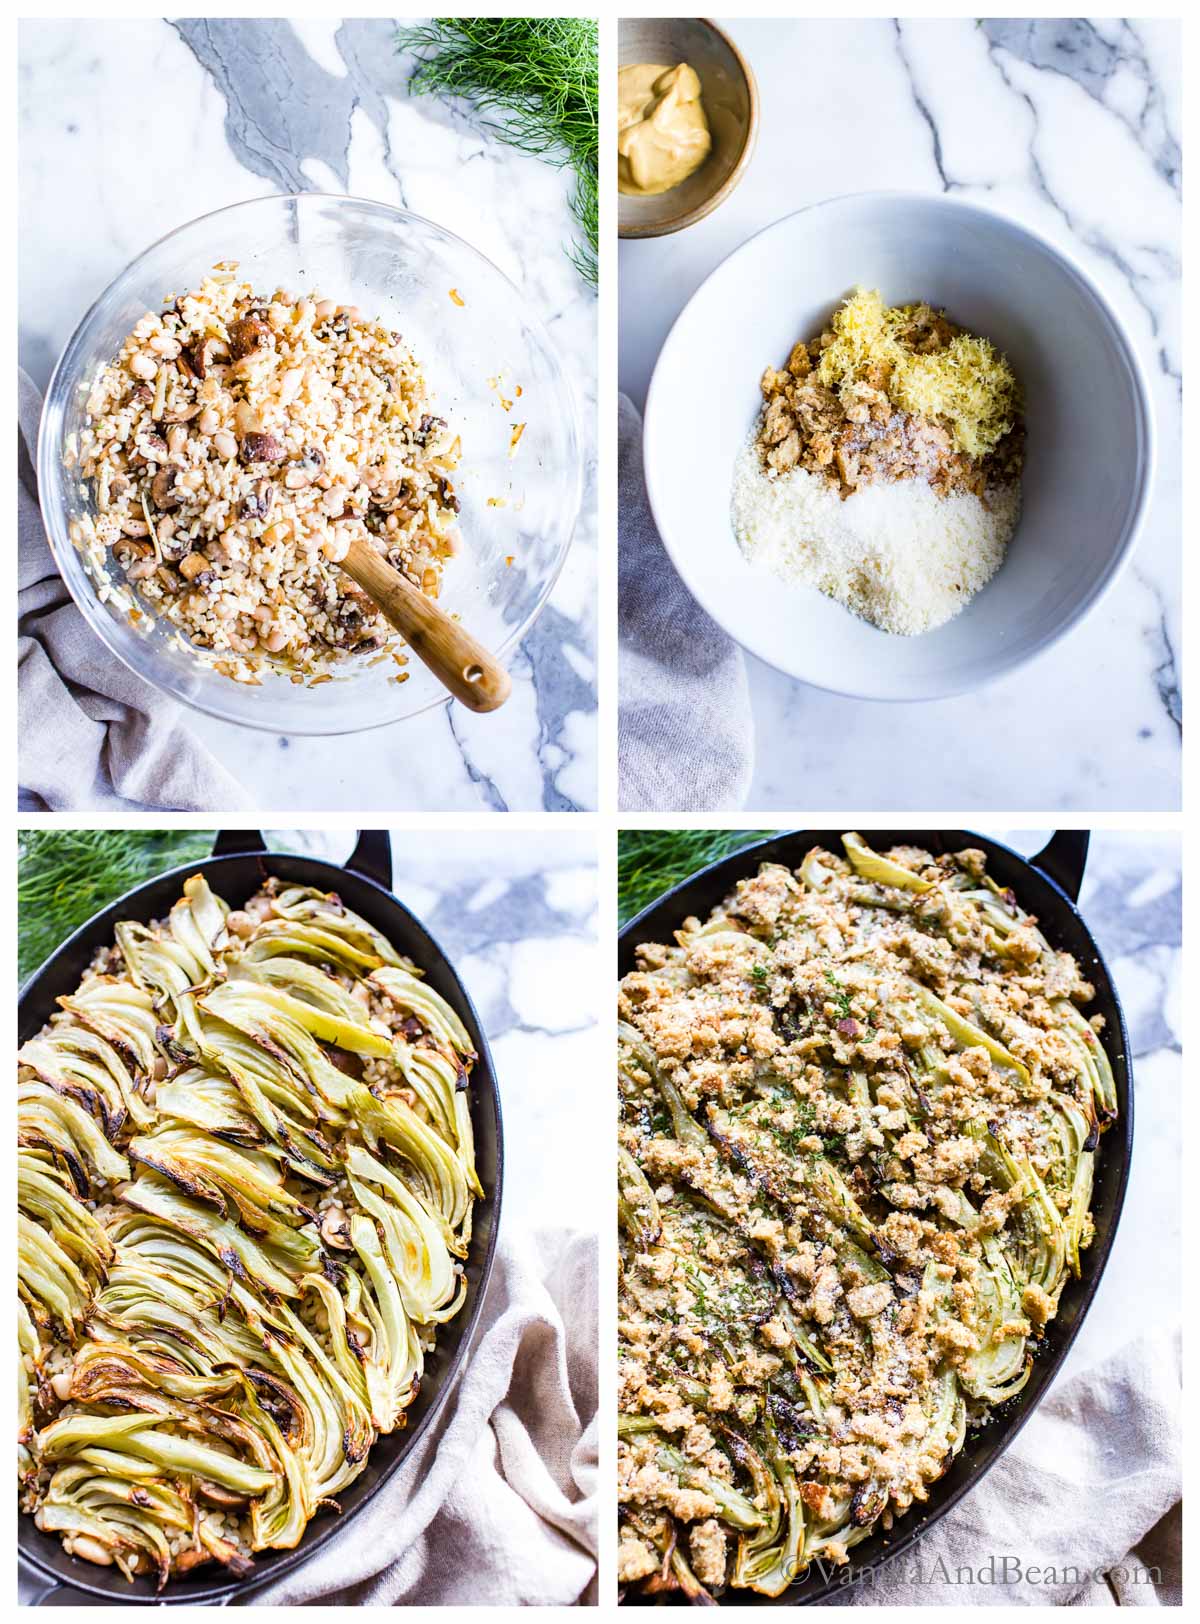 Four images for Fennel Mushroom Gratin vegetarian: 1. mixing gratin ingredients in a bowl. 2. bread crumb Parmesan topping in a bowl. 3. Roasted fennel mushroom and white bean mixture in a gratin dish with roasted fennel on top. 4. roasted fennel gratin assembled and ready to bake.